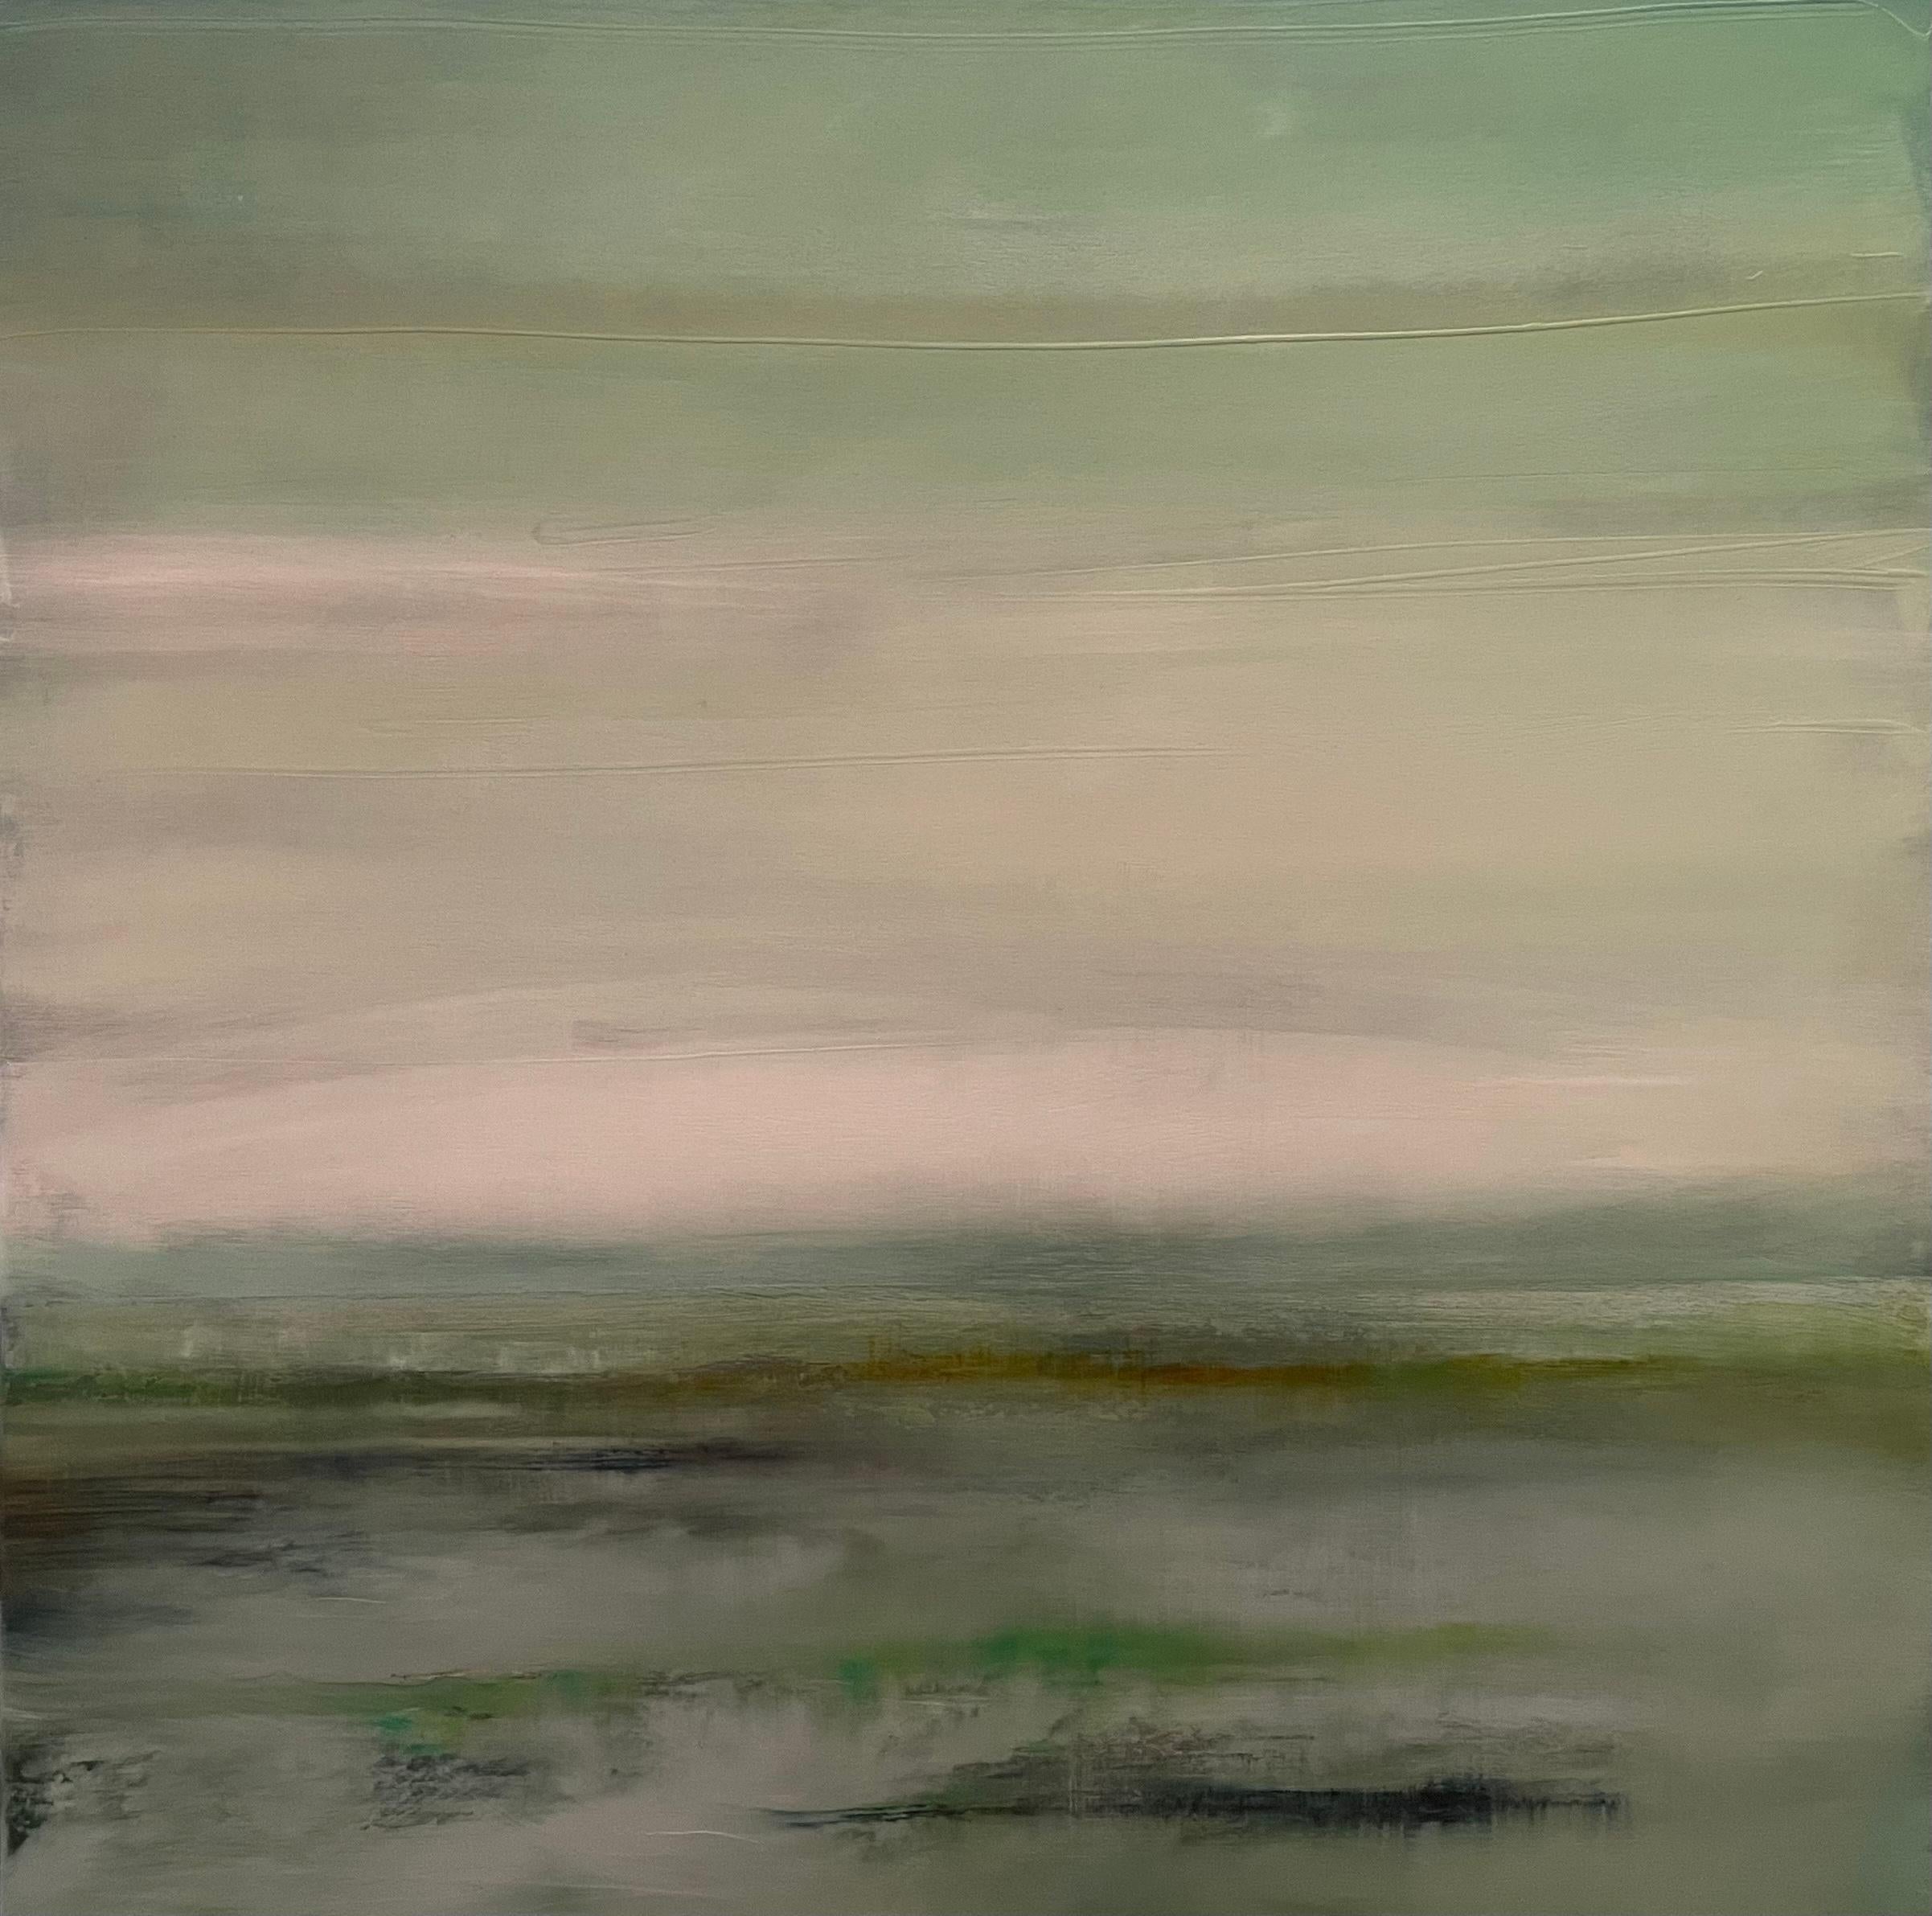 The upper half of the composition unveils a mesmerizing interplay of green and white, creating the illusion of a misty, ethereal sky. It's a vista where imagination takes flight, evoking a sense of wonder akin to stepping into a dream. As we descend